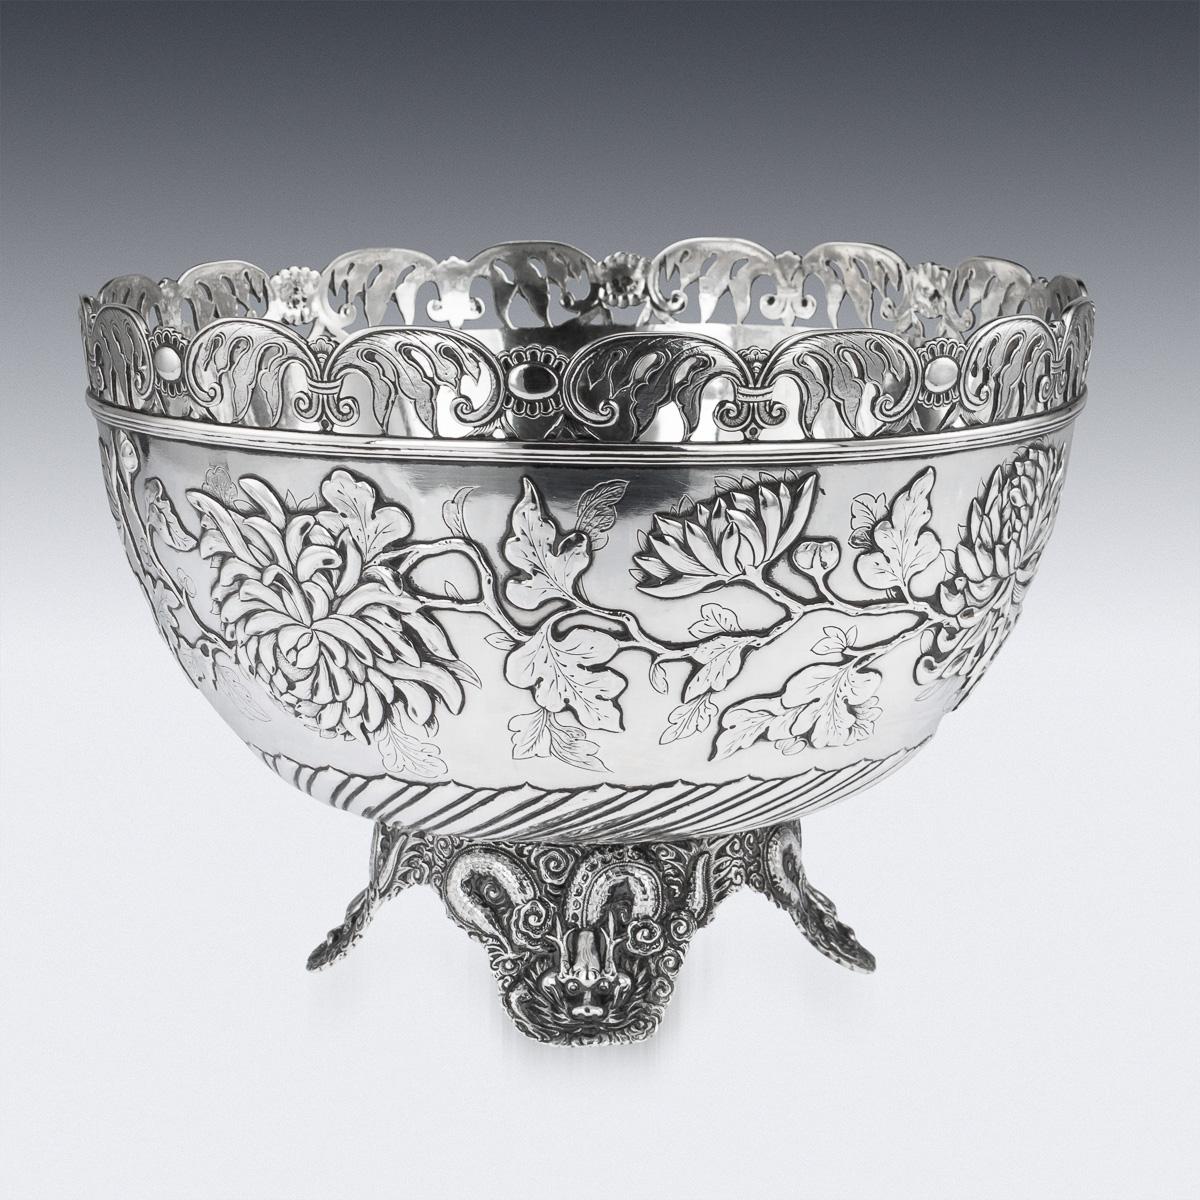 Antique late 19th century Chinese solid silver decorative fruit bowl, of traditional round form, applied with a shaped arched and pierced rim with flouted decoration along the bottom. The decoration is crisp and detailed, decorated with a continuous